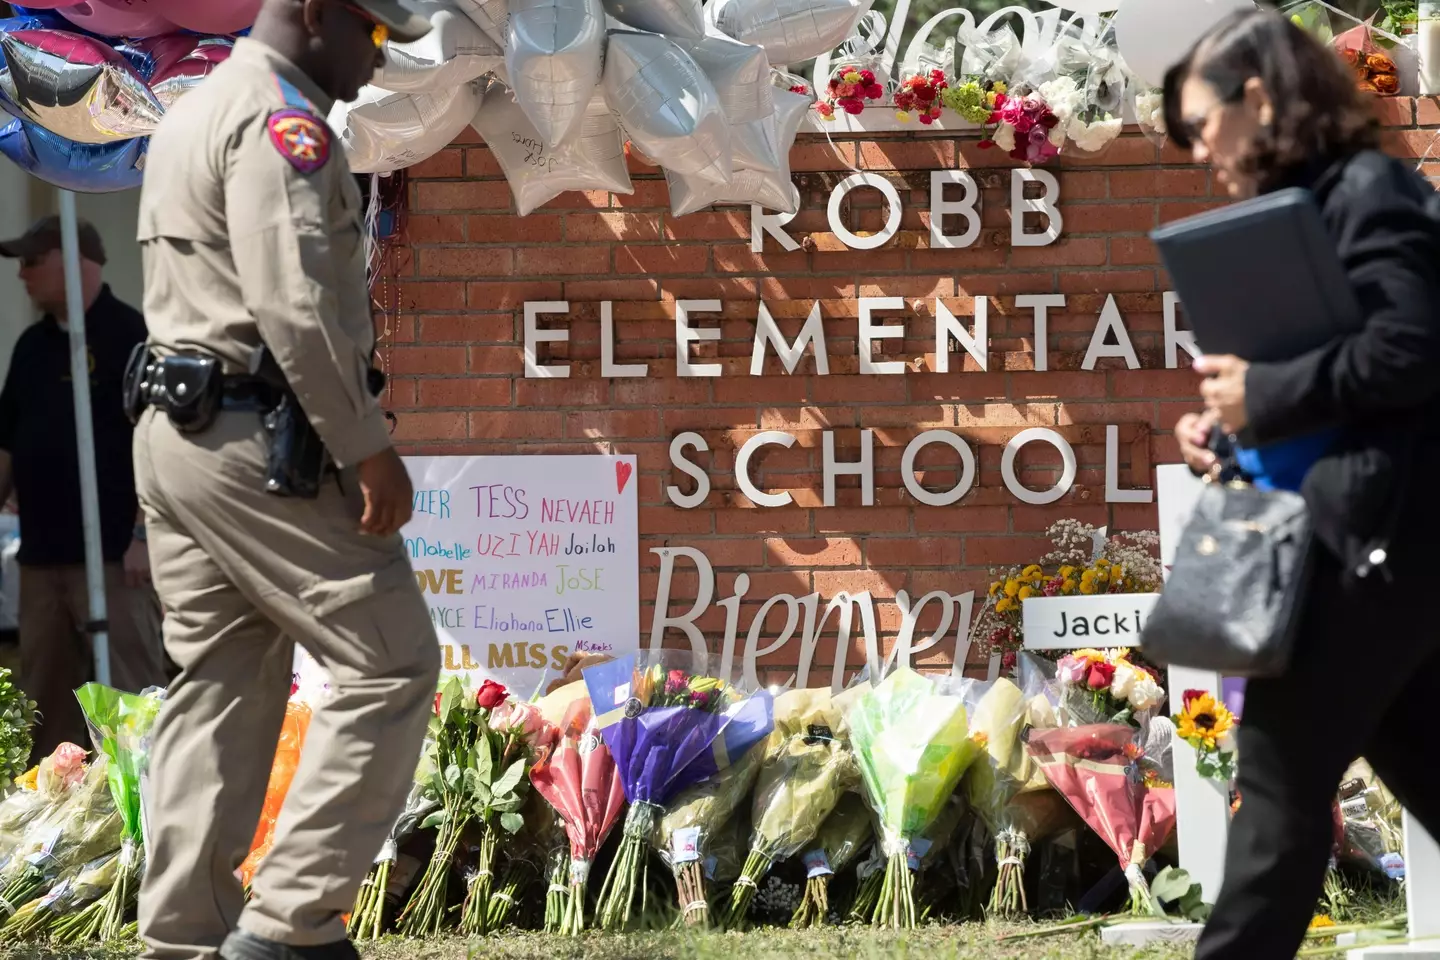 Tributes and donations have been pouring in following the shooting.